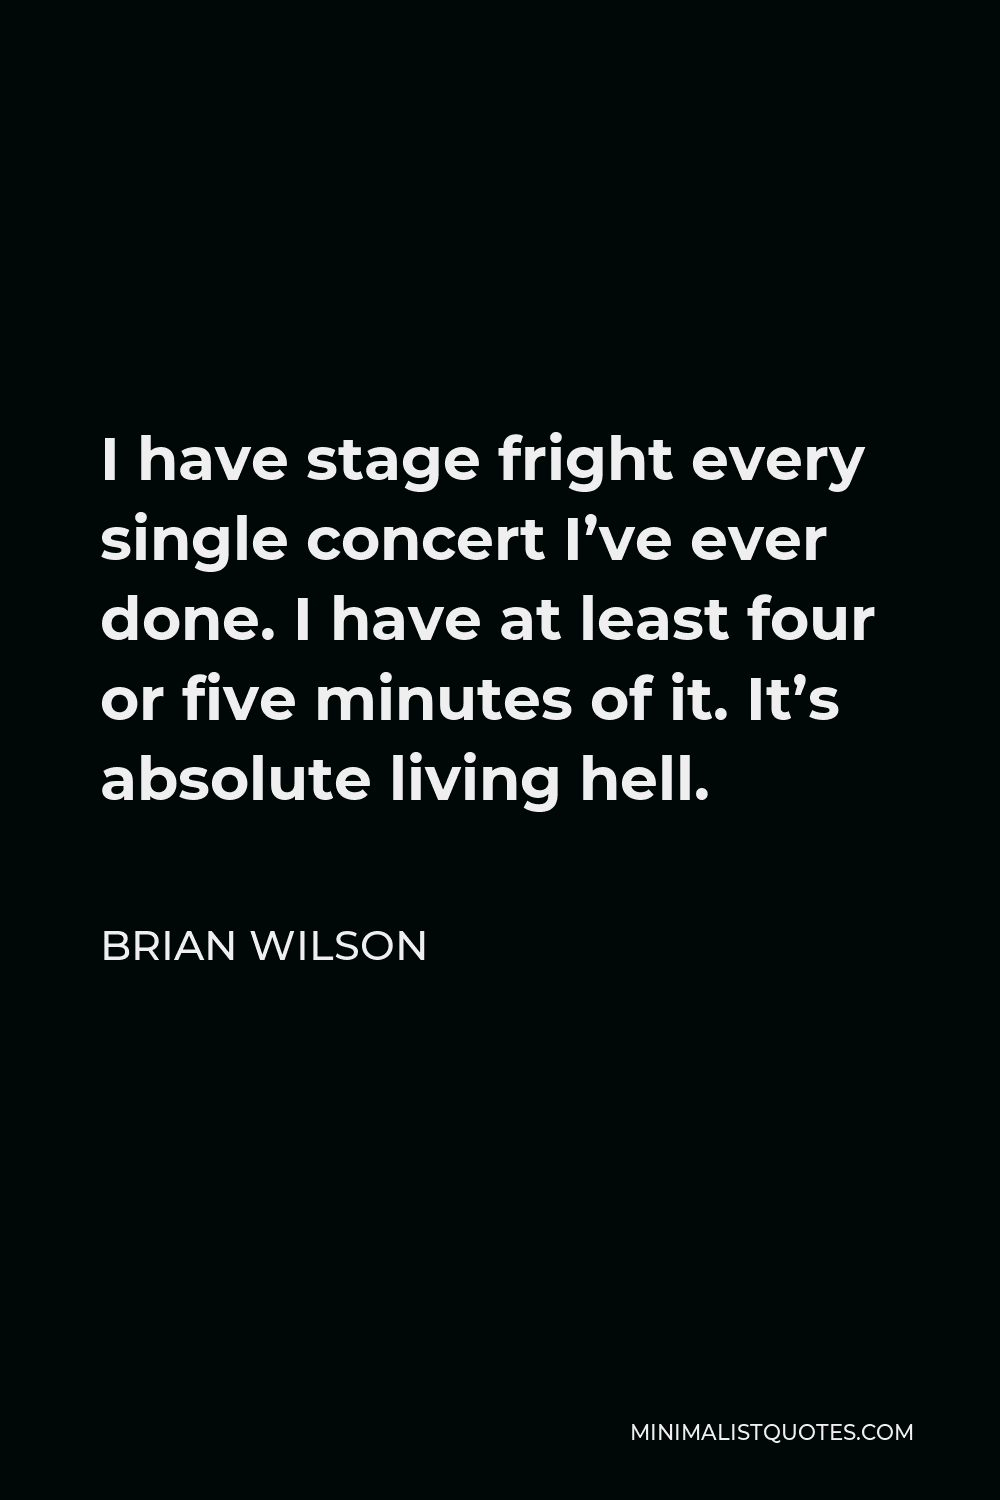 Brian Wilson Quote - I have stage fright every single concert I’ve ever done. I have at least four or five minutes of it. It’s absolute living hell.